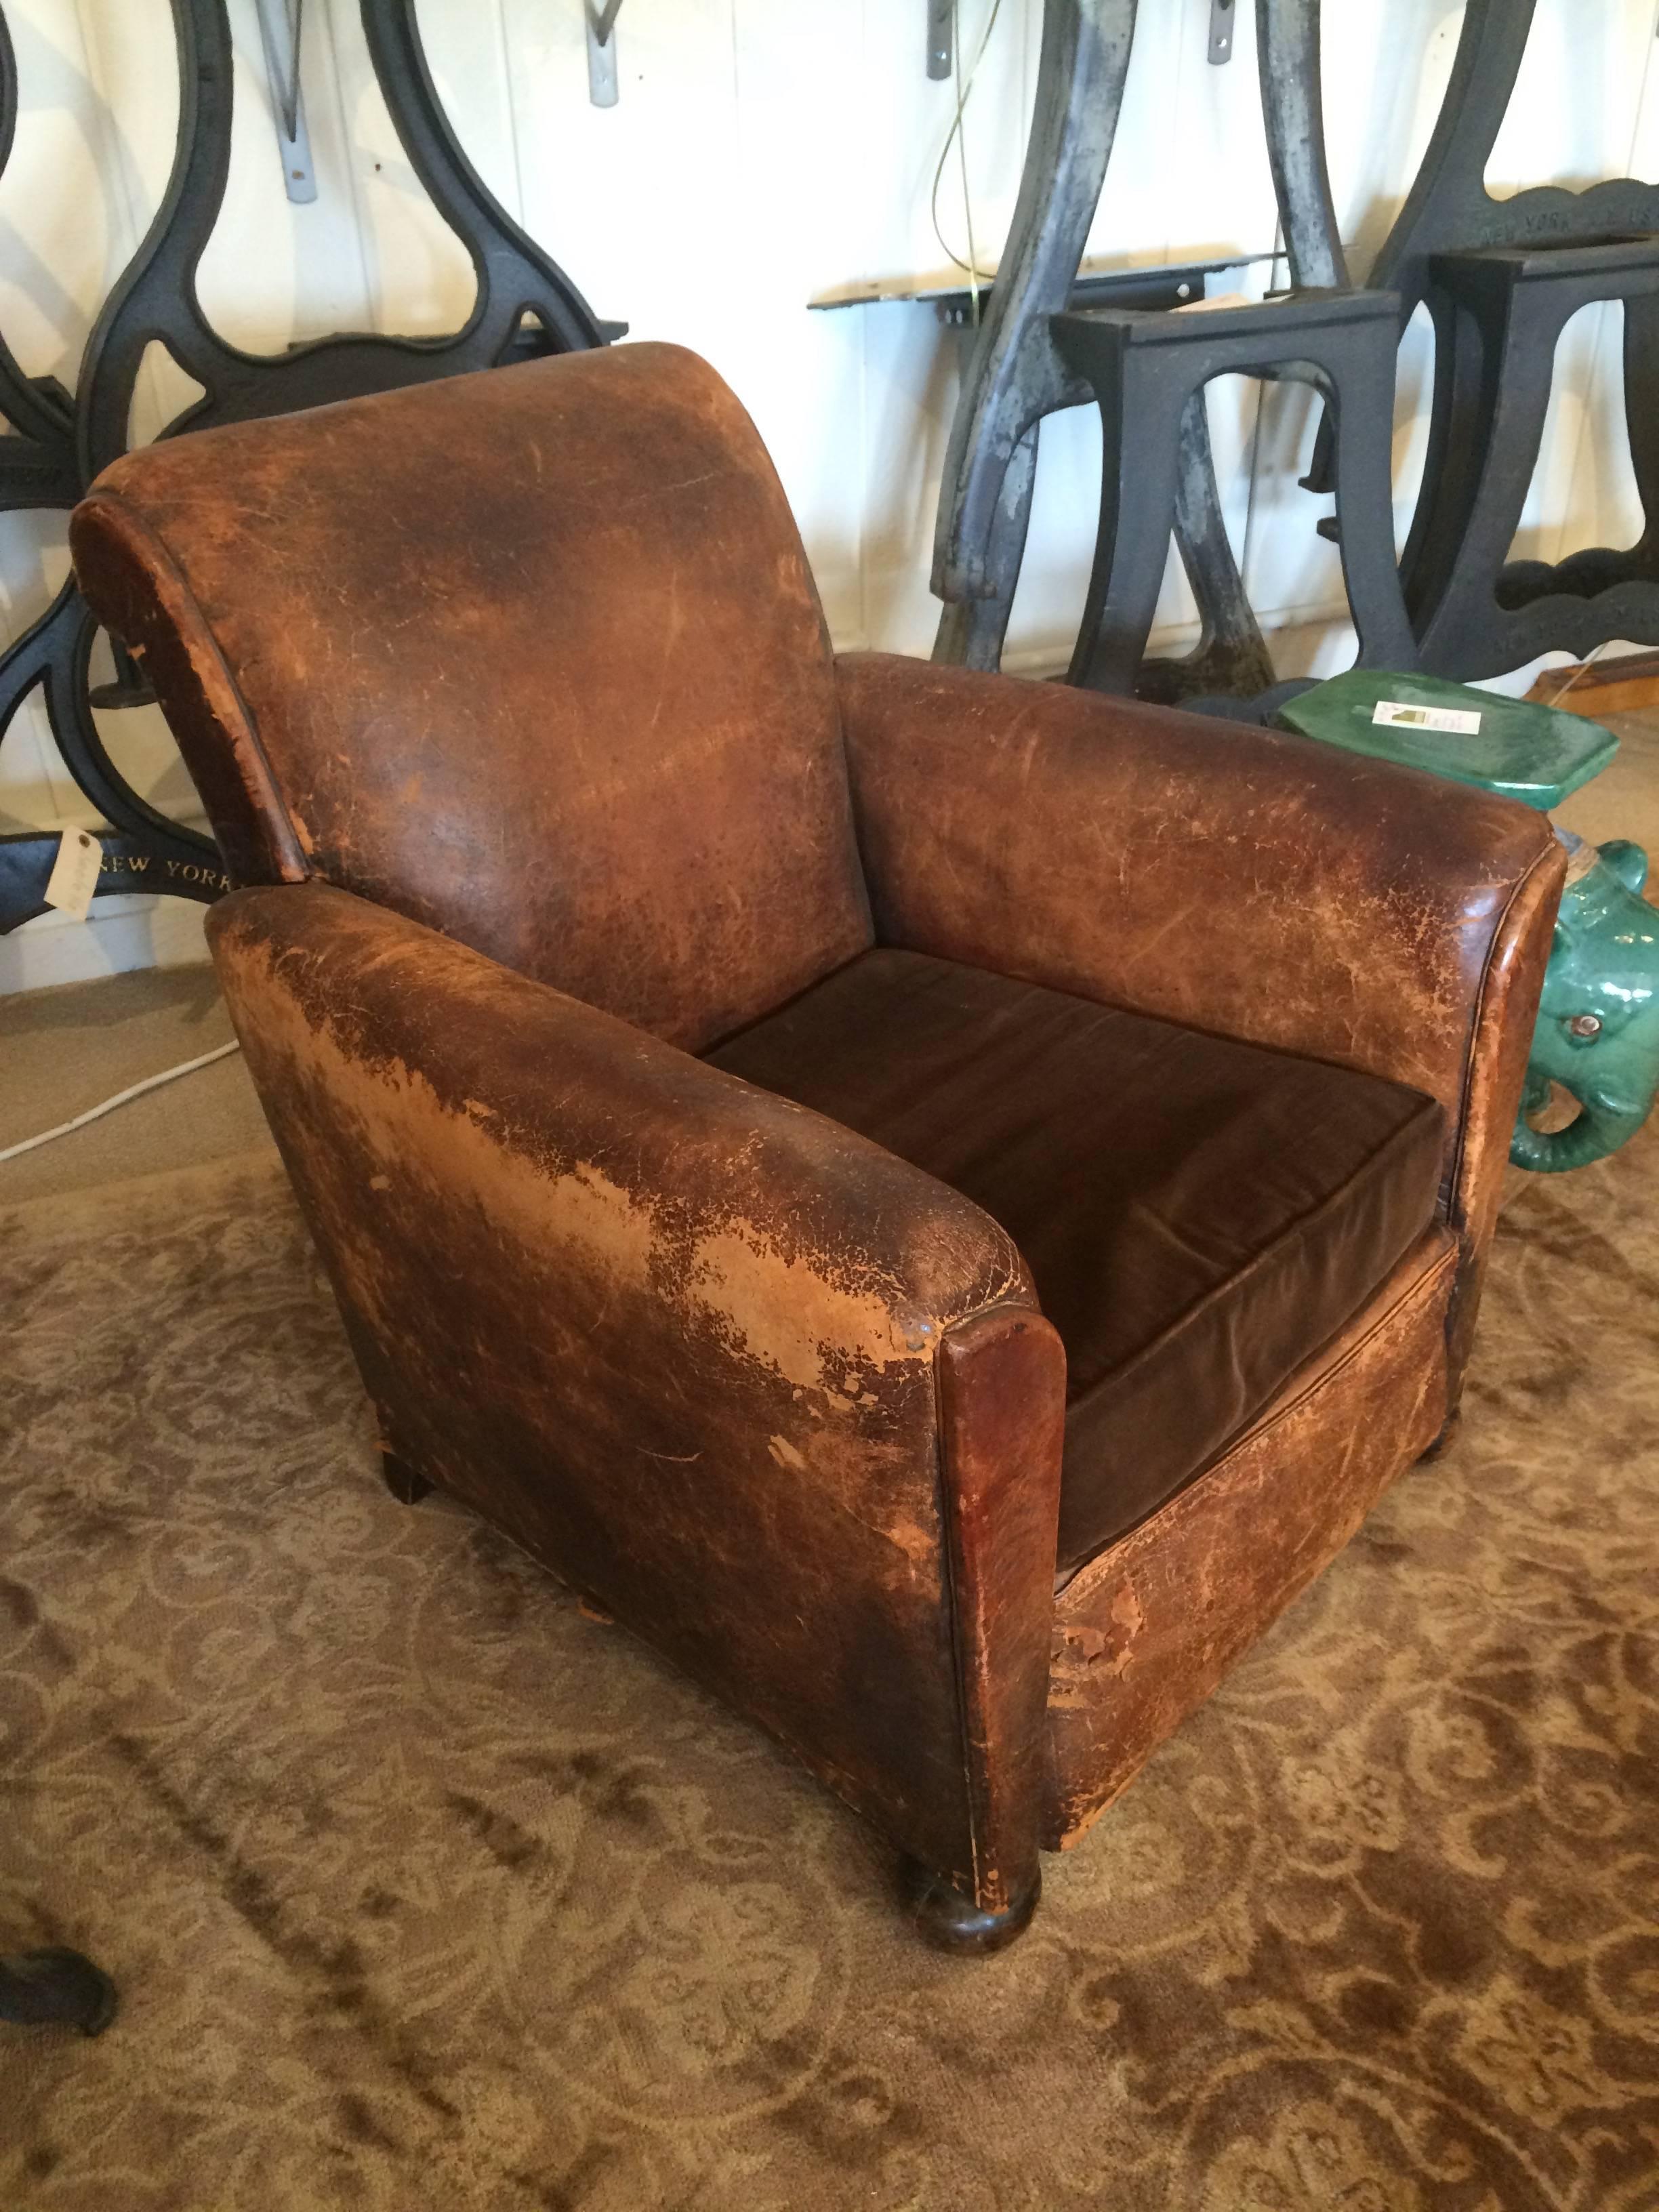 Wonderful vintage brown leather club chair from France, apartment sized, with richly distressed leather, bun feet on the front, and big dark nailheads around the back. Seat cushion is comfy brown velvet.